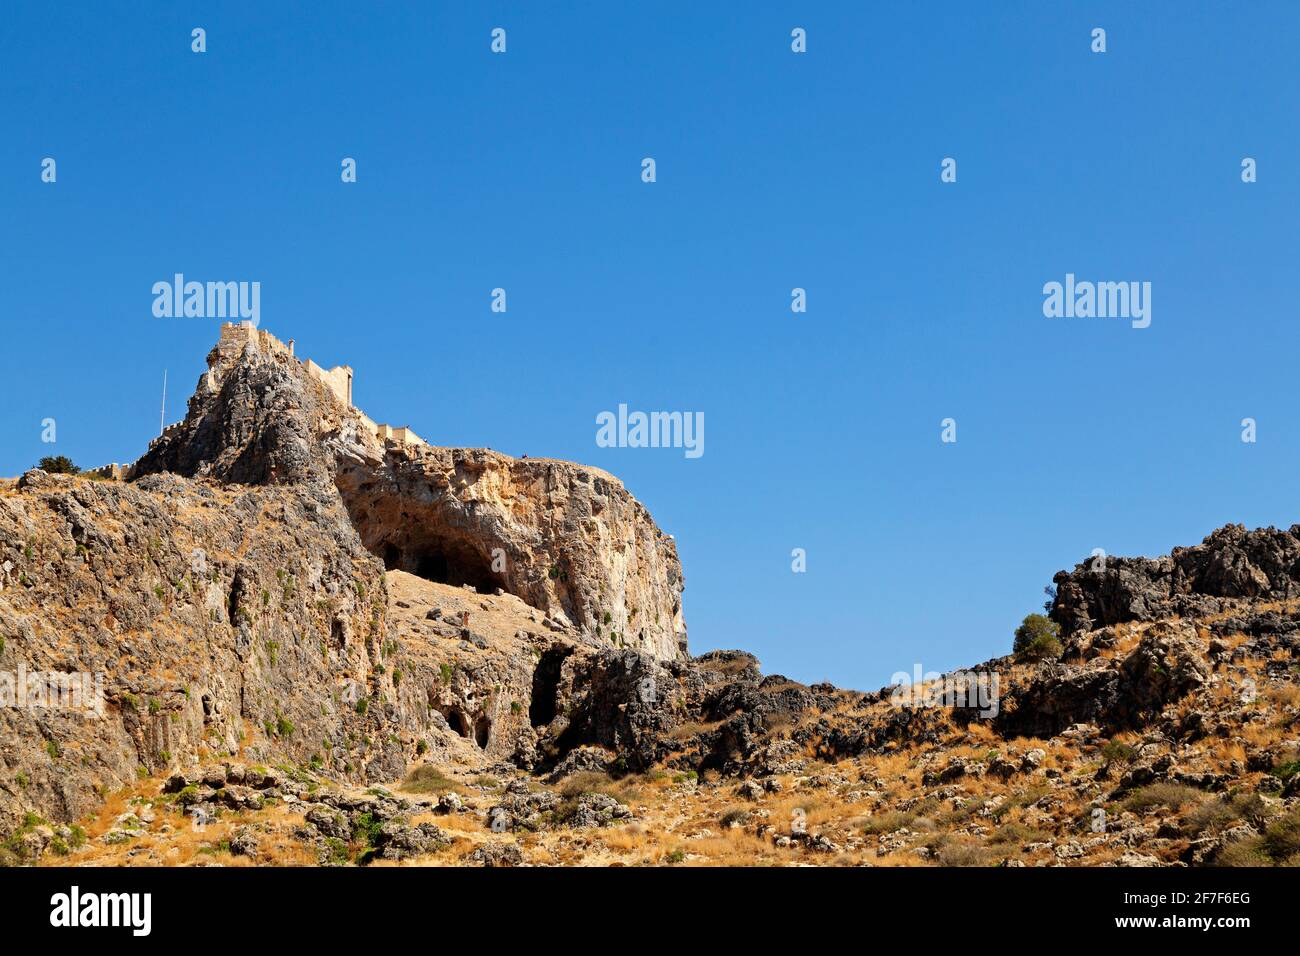 The Lindian Acropolis, an Ancient Greek citadel, on a rocky outcrop in Lindos on Rhodes, Greece. The citadel was later a base for the Knights of St Jo Stock Photo